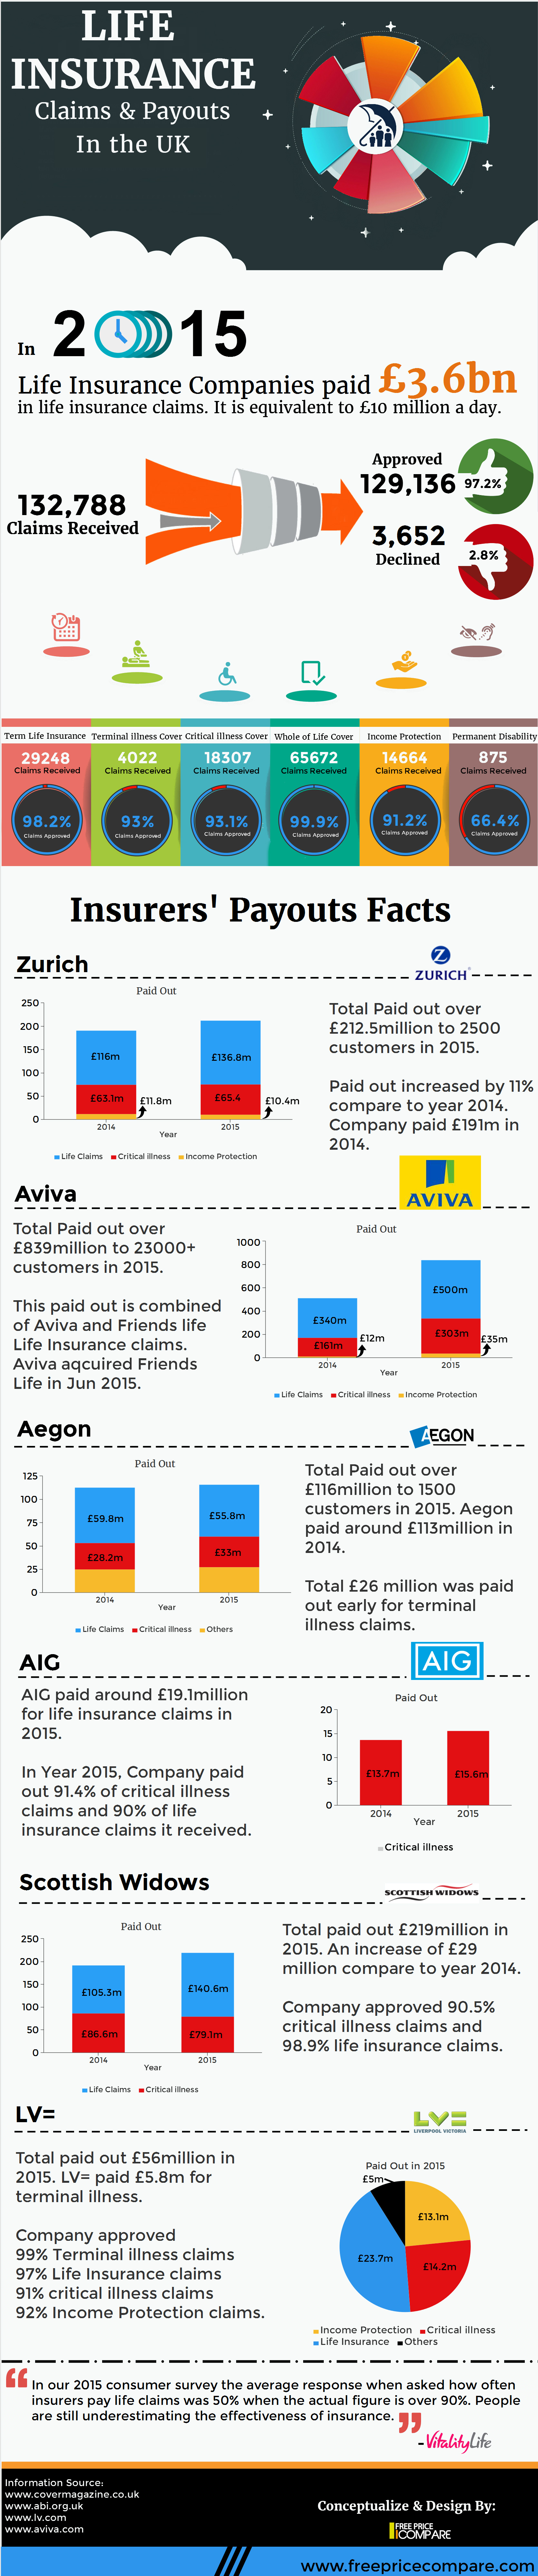 Life Insurance Claims and Pay outs in the UK